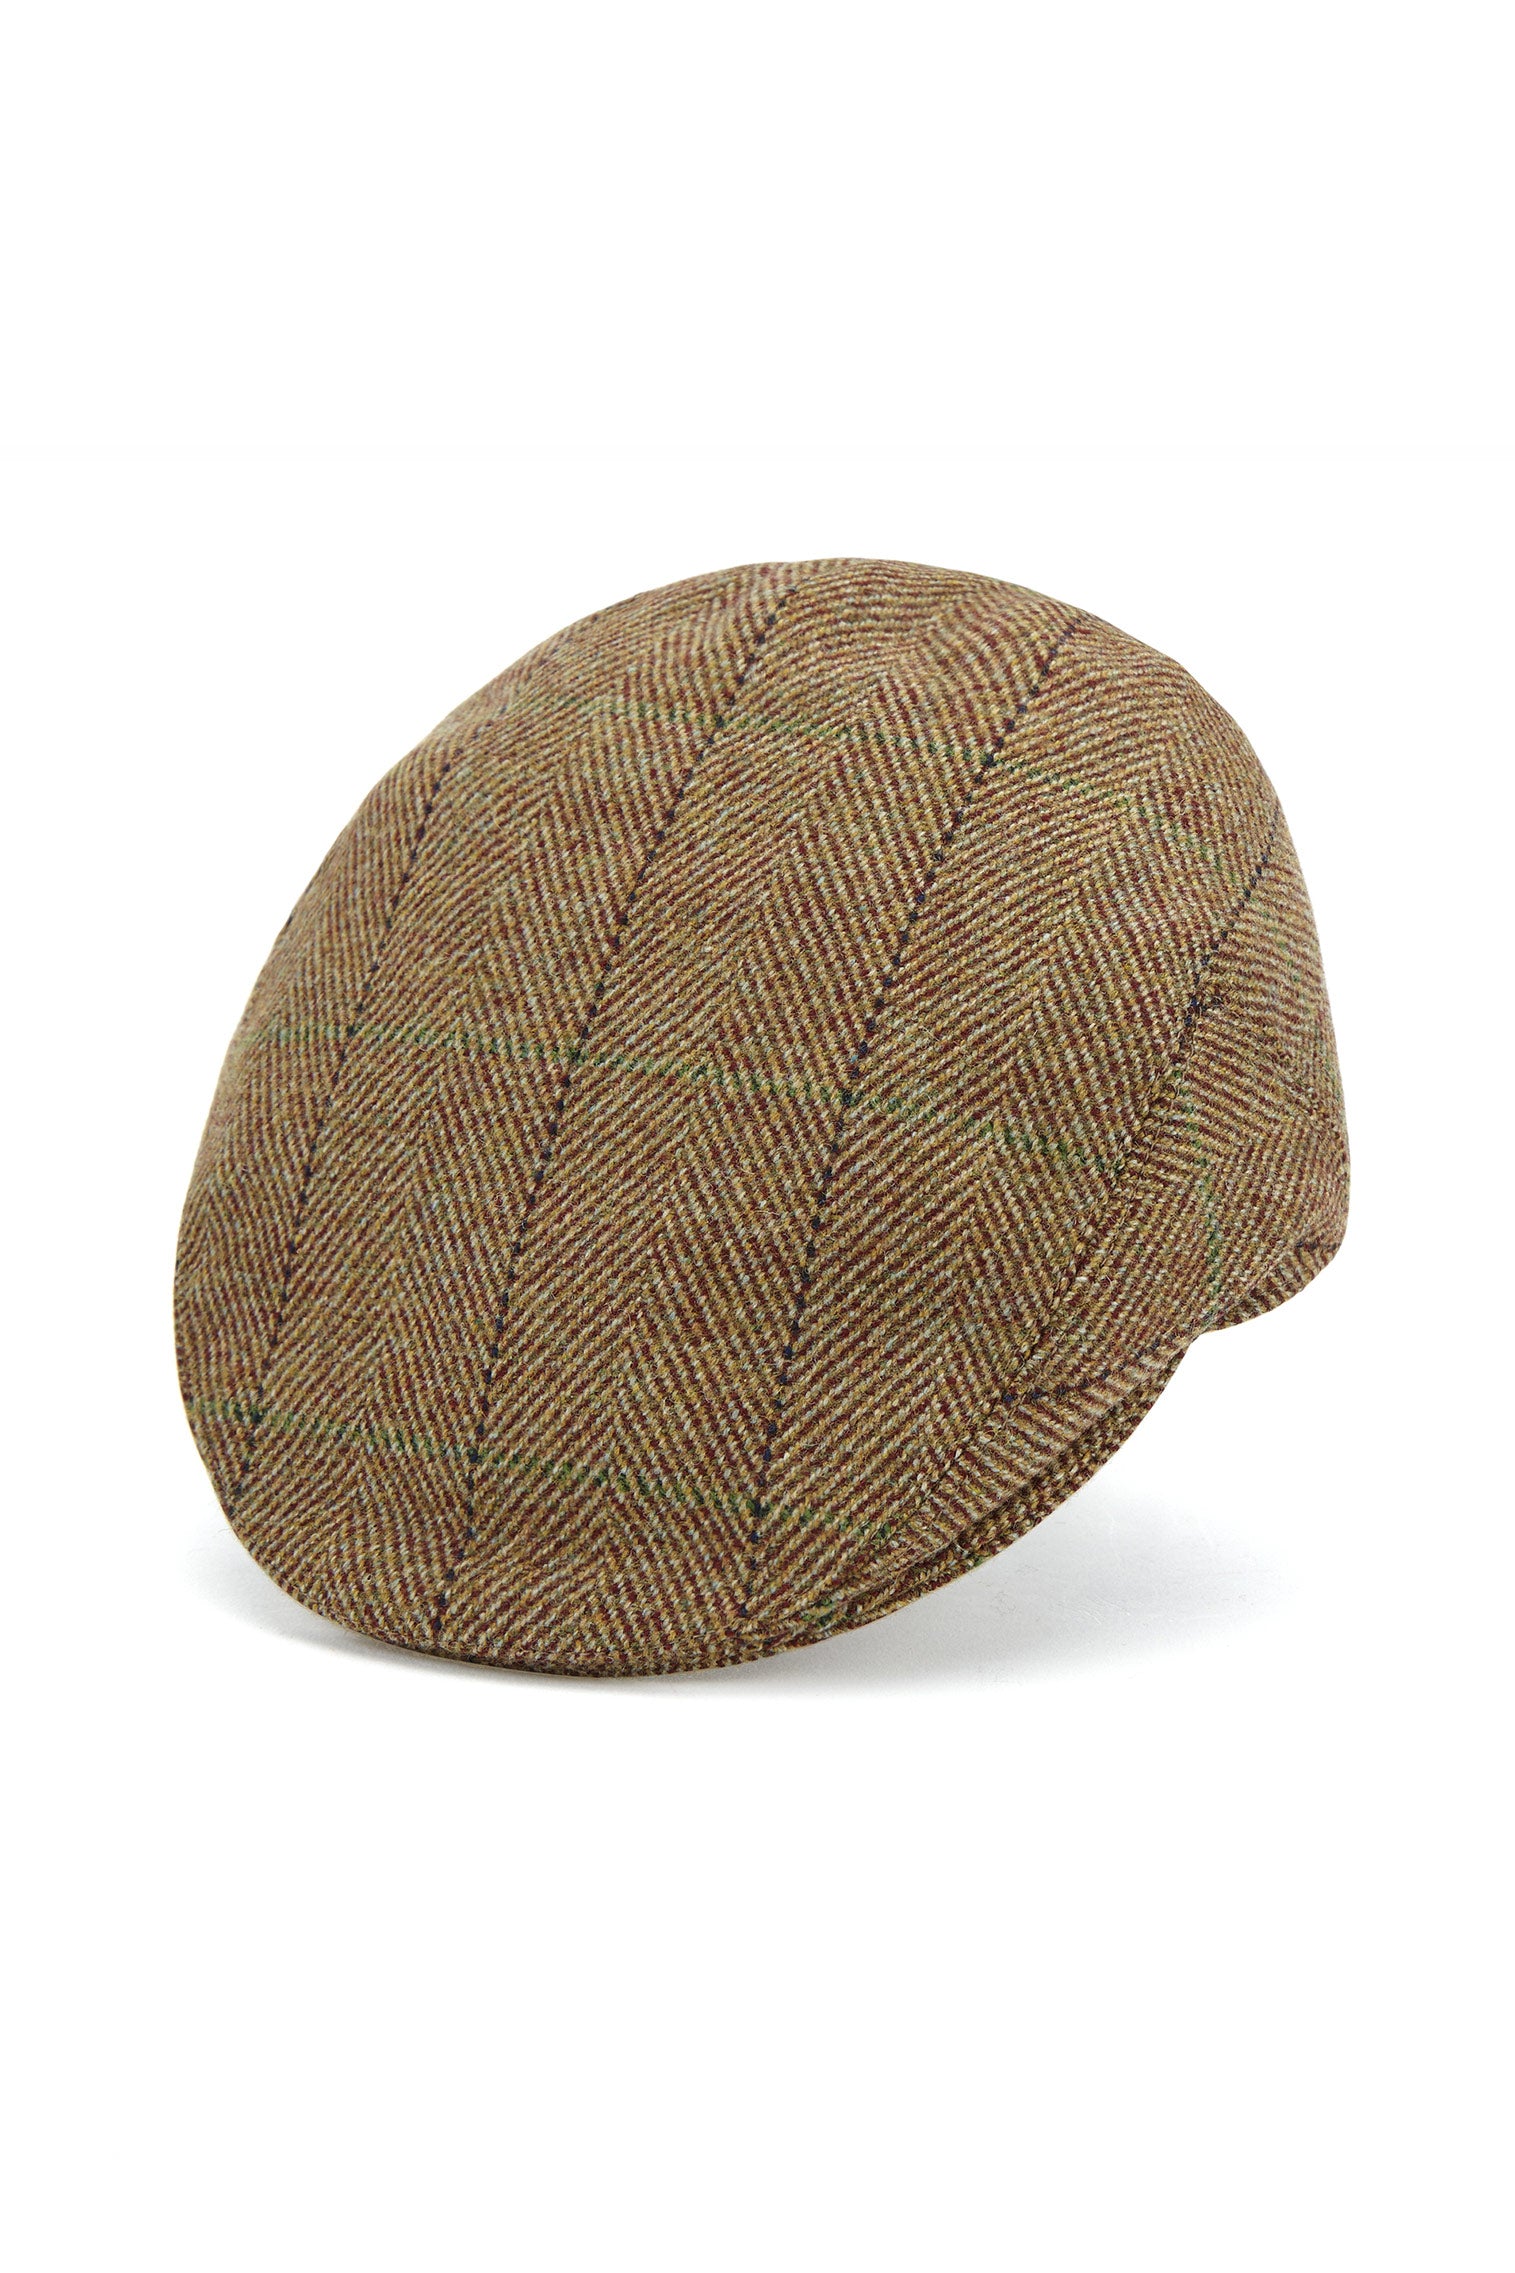 Gill Tweed Flat Cap - Products - Lock & Co. Hatters London UK